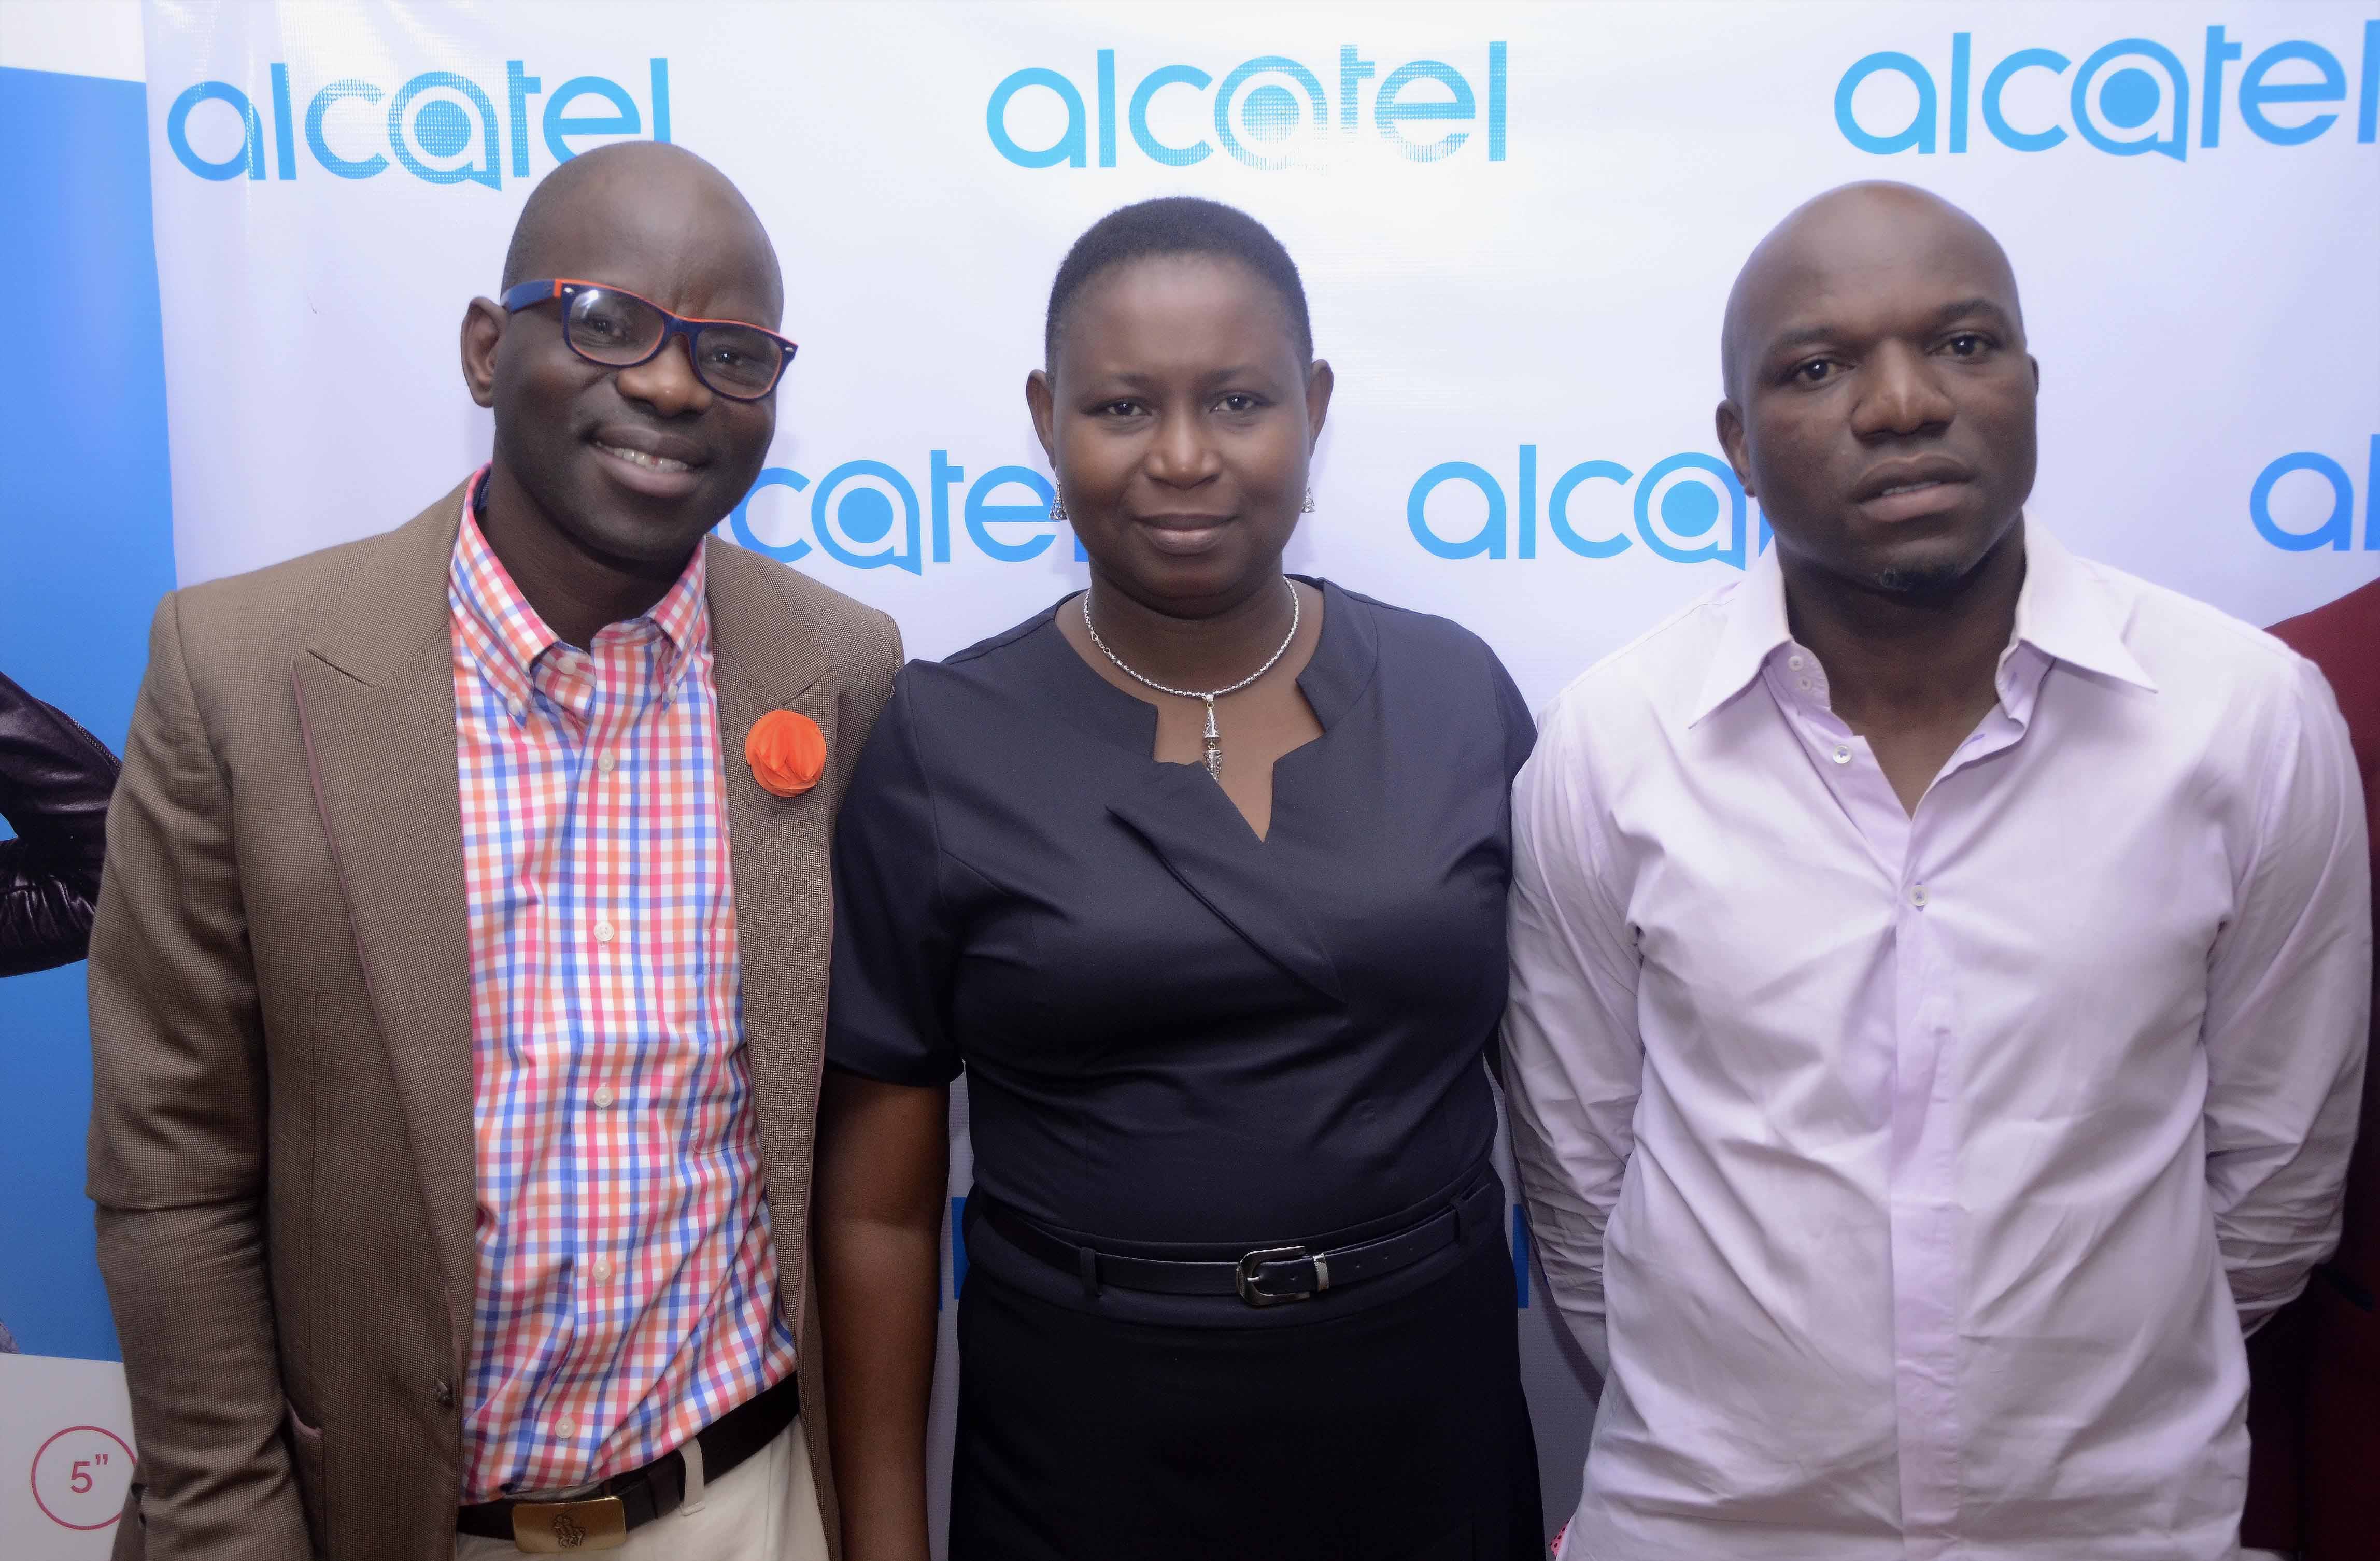 Alcatel strengthens relationships with partners, adds new technology - marketingspace.com.ng